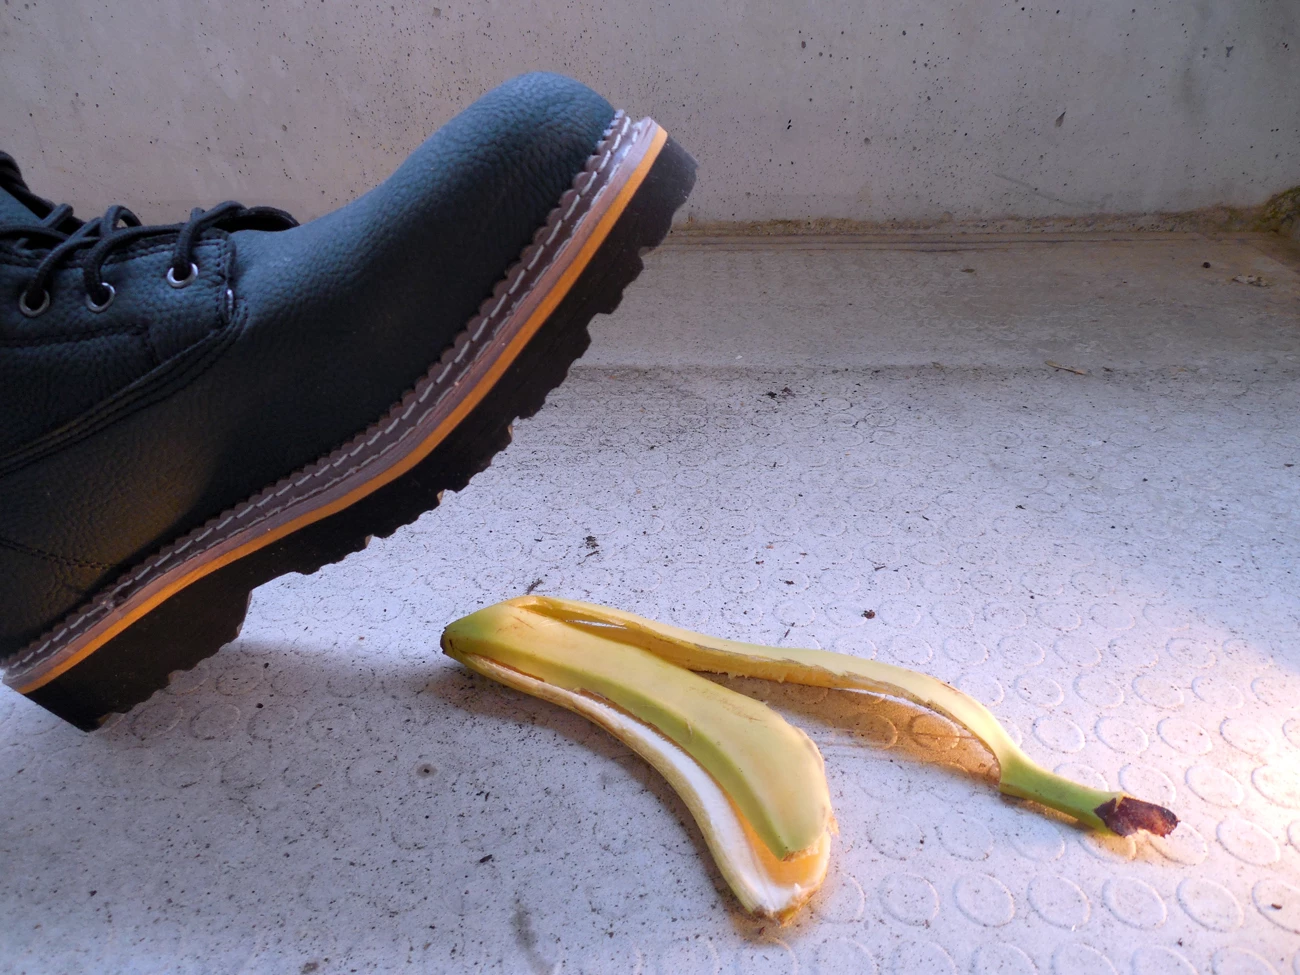 A persons work boot about to step on banana peel